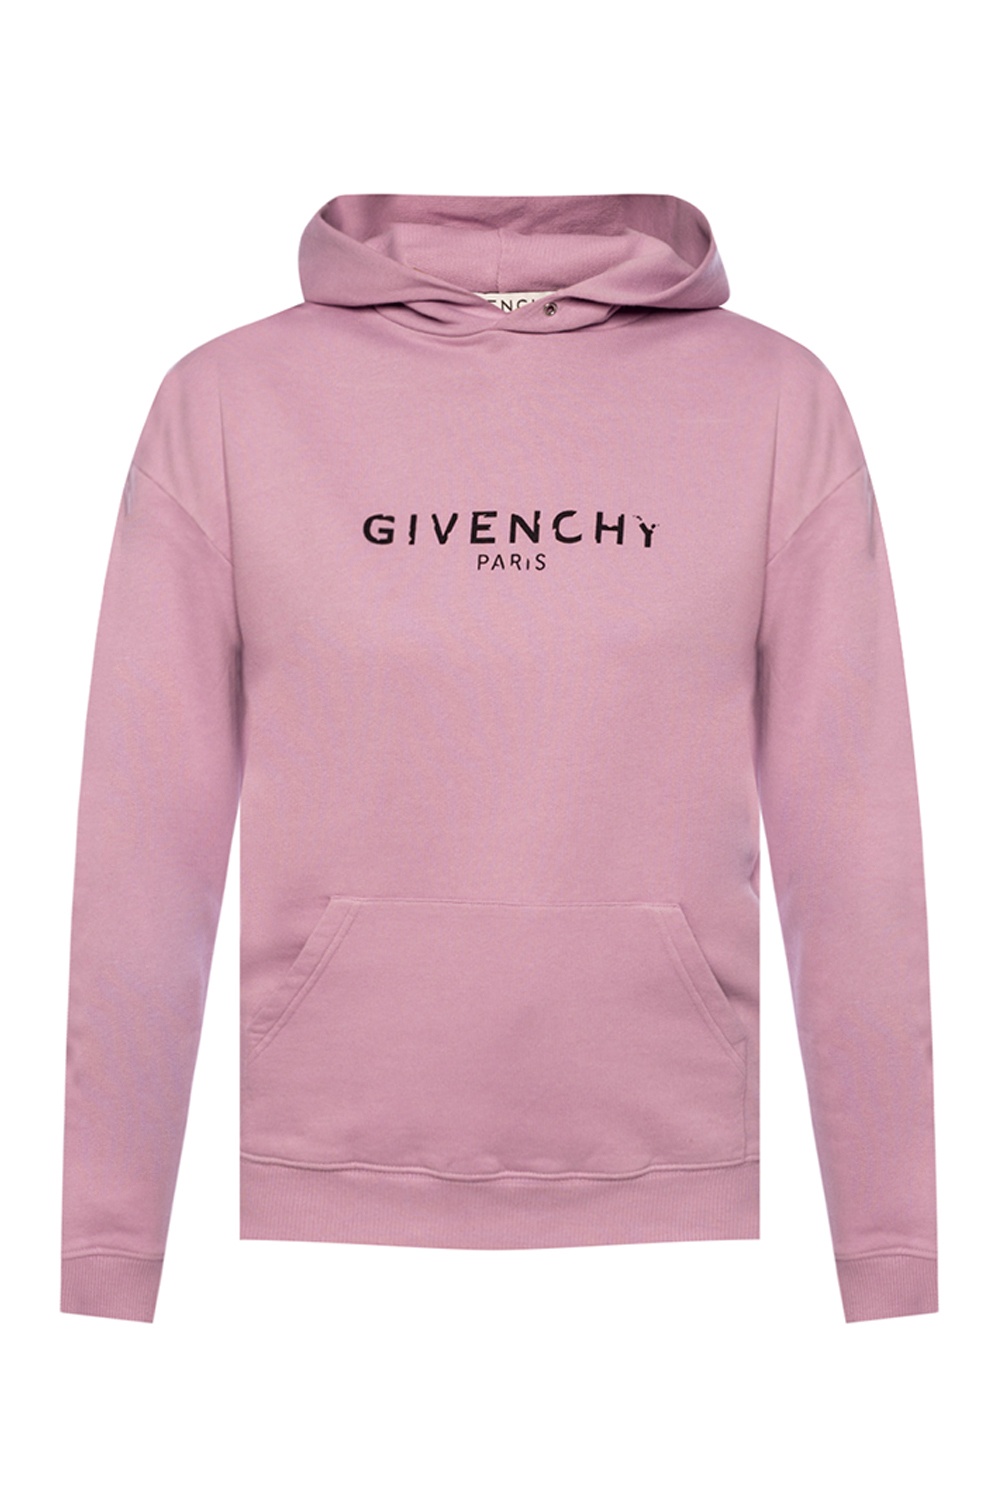 givenchy pink hoodie